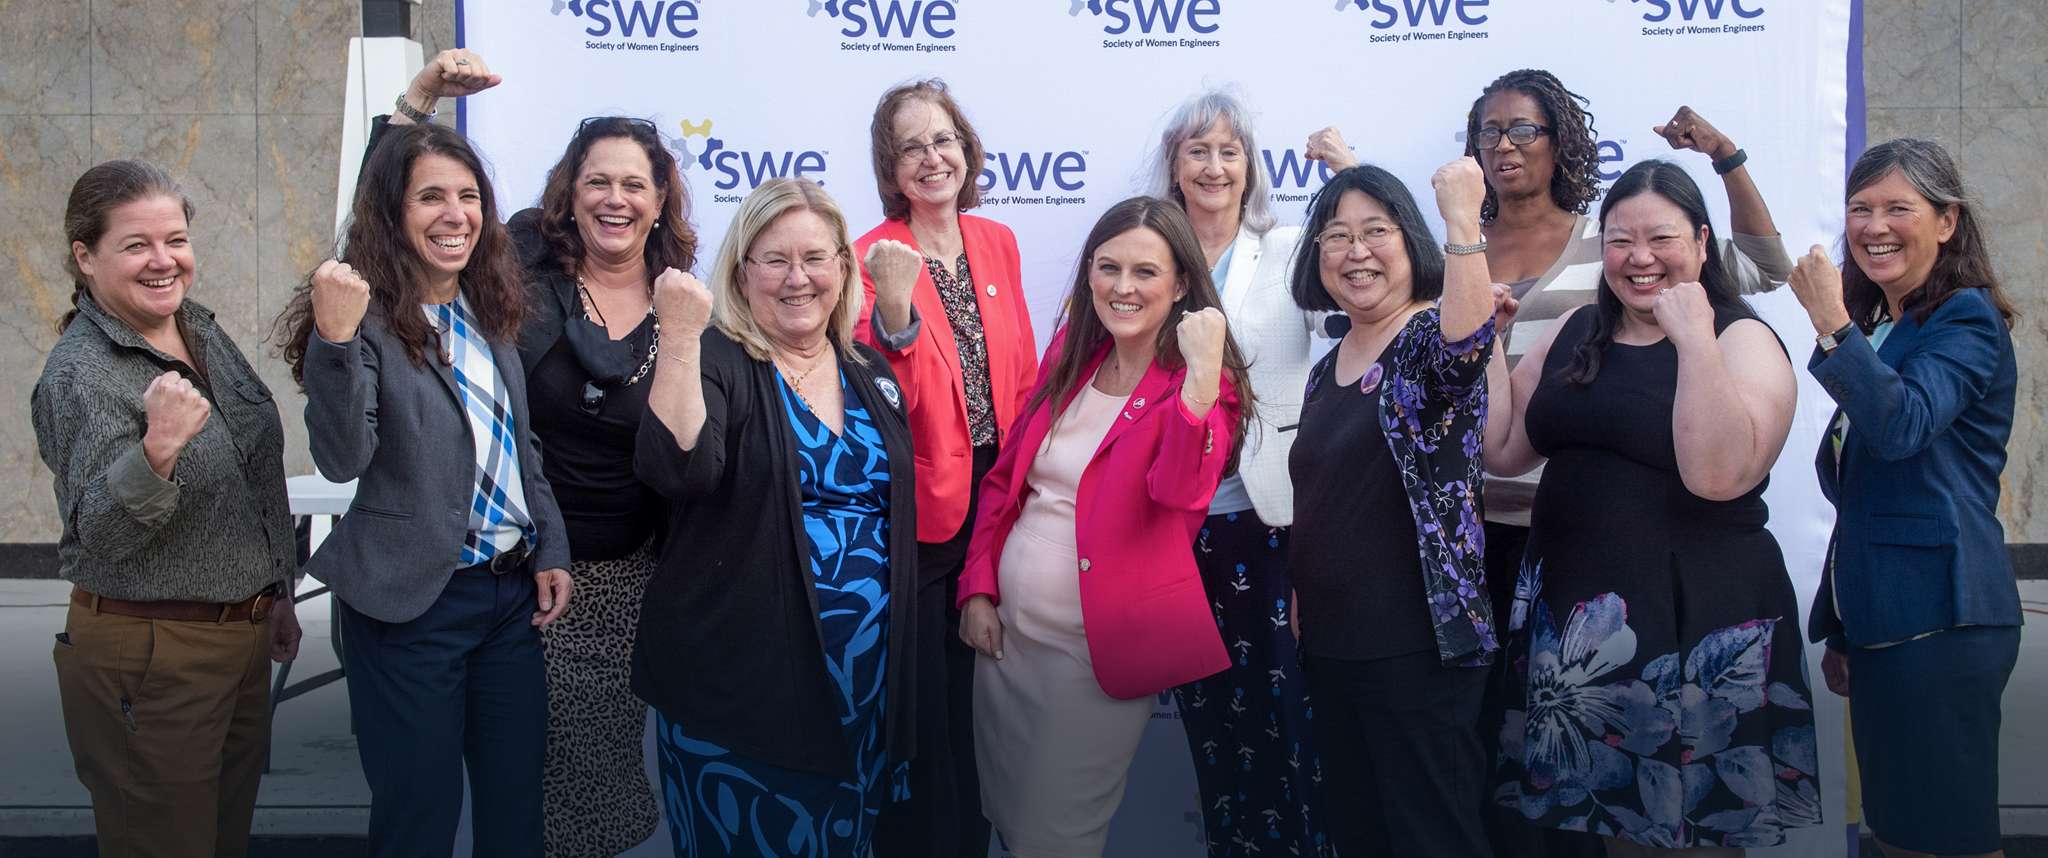 Aerospace engineer Rachel Morford was officially installed as the FY22 President of the Society of Women Engineers during the fall. She, along with the incoming SWE Board of Trustees, was honored during a ceremony held on Aerospace’s El Segundo campus.